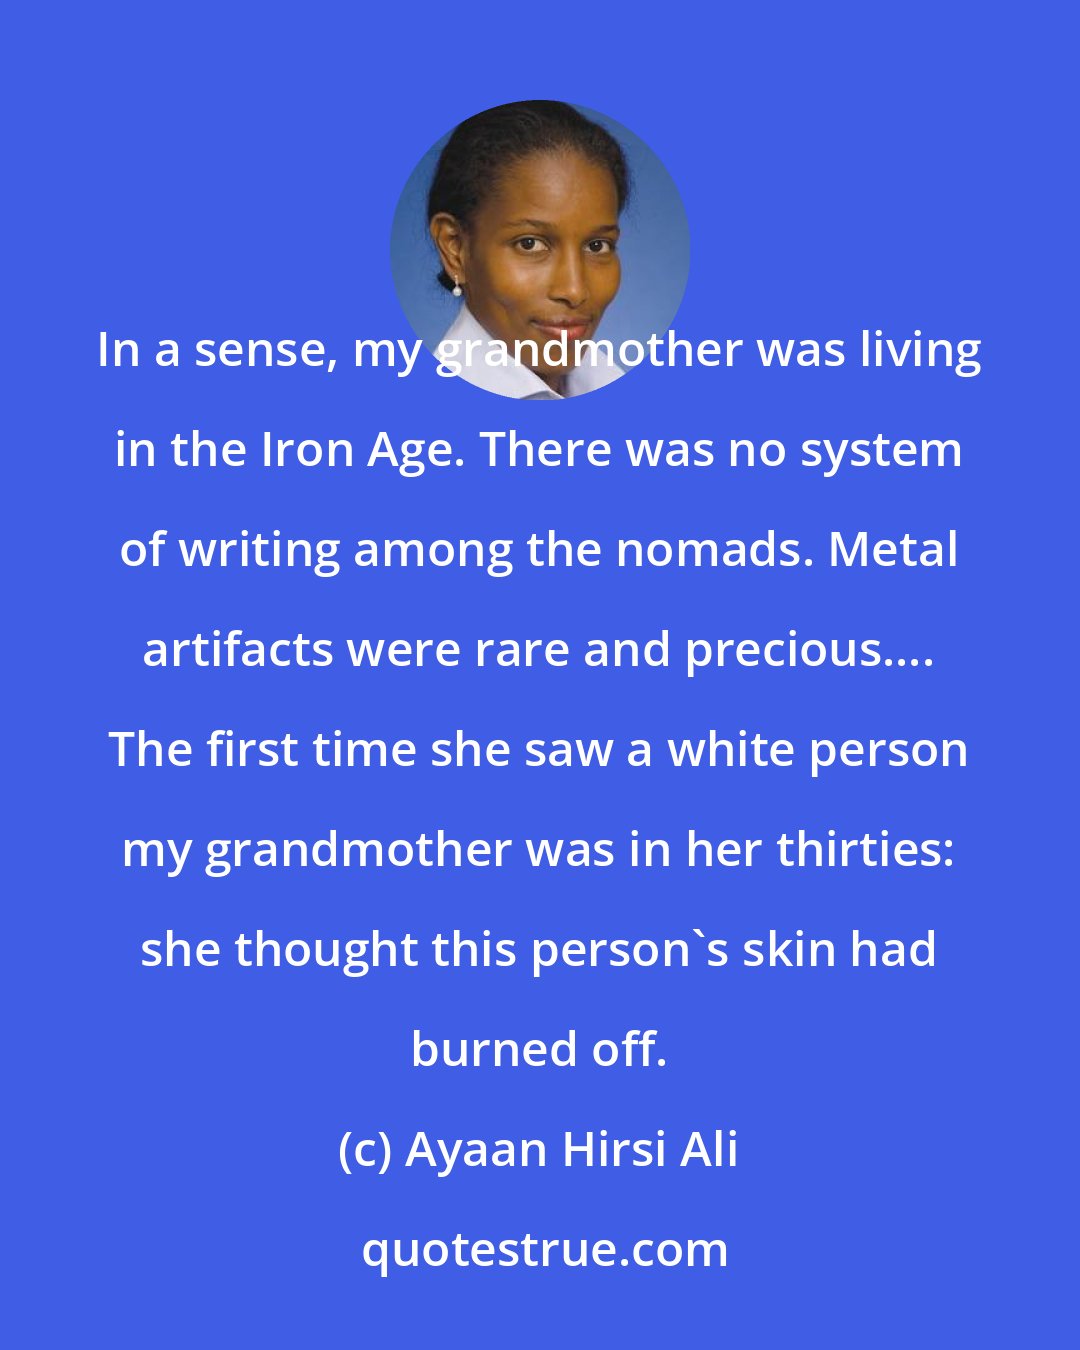 Ayaan Hirsi Ali: In a sense, my grandmother was living in the Iron Age. There was no system of writing among the nomads. Metal artifacts were rare and precious.... The first time she saw a white person my grandmother was in her thirties: she thought this person's skin had burned off.